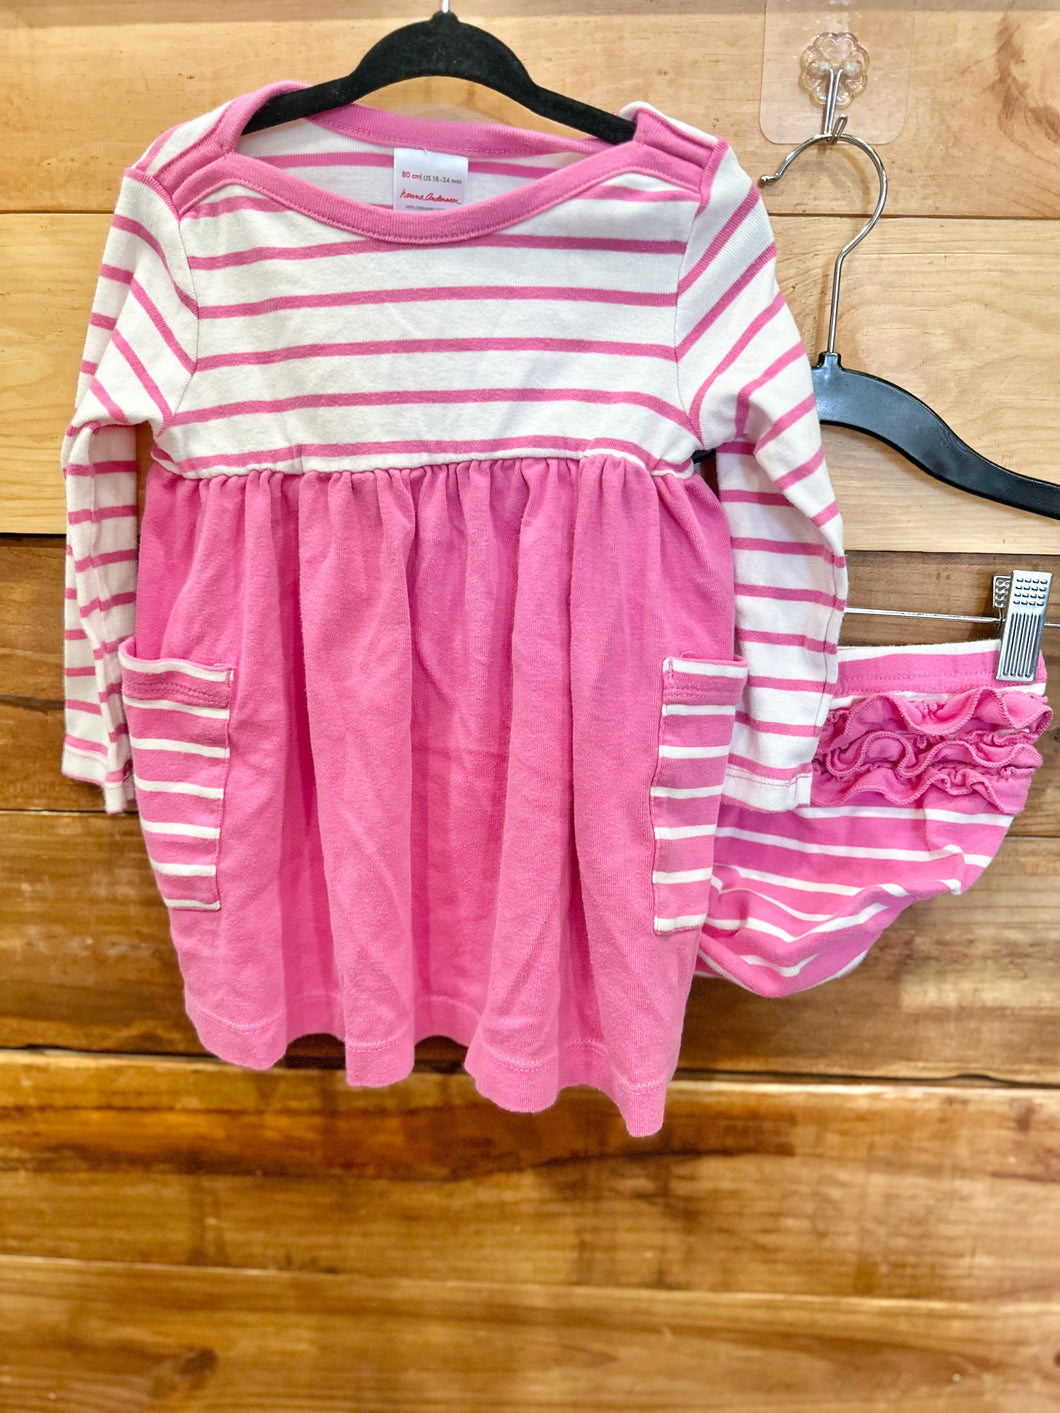 Hanna Andersson Pink Striped Dress w/Bloomers Size 18-24m